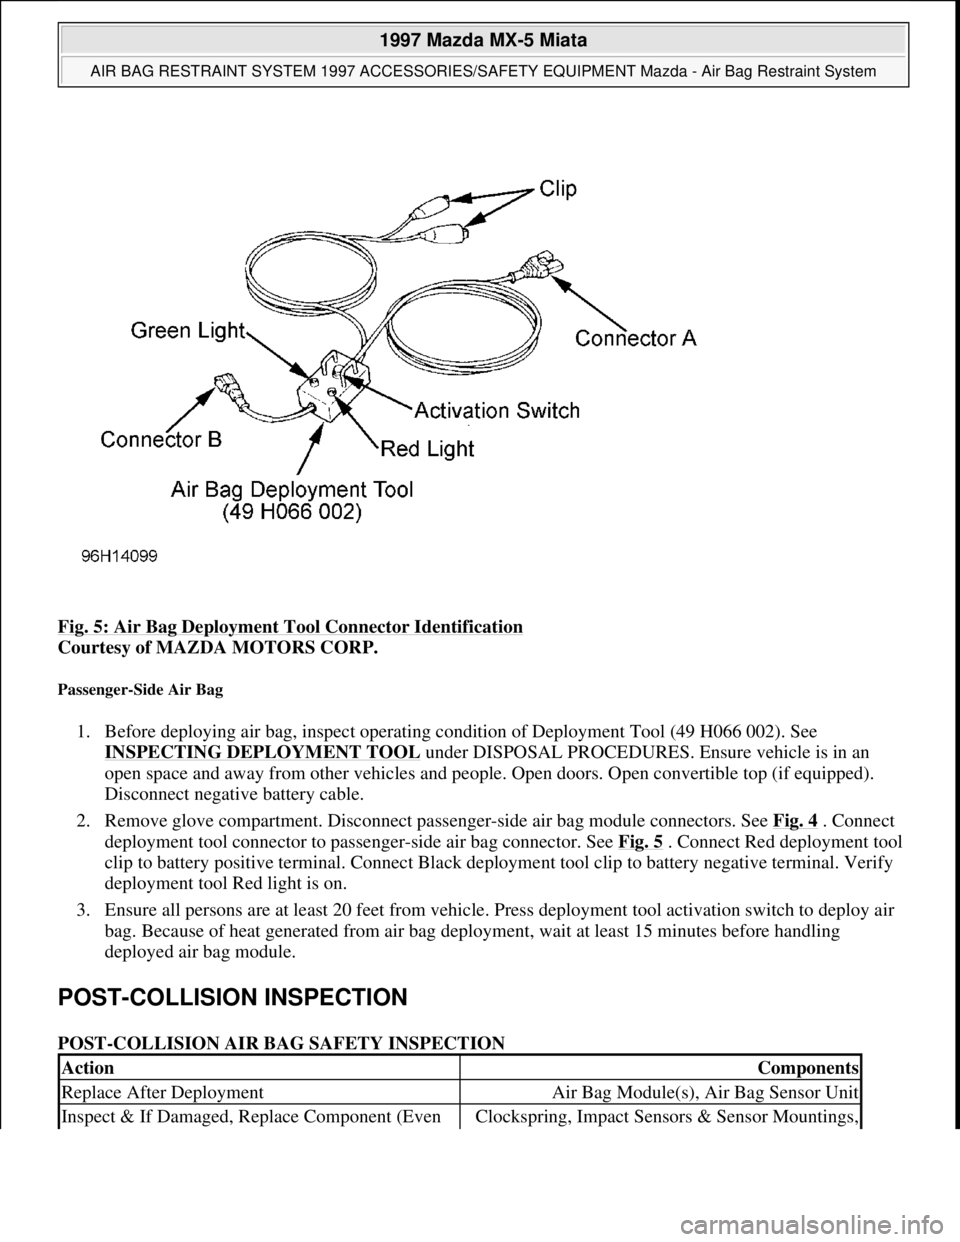 MAZDA MIATA 1997  Factory Repair Manual Fig. 5: Air Bag Deployment Tool Connector Identification 
Courtesy of MAZDA MOTORS CORP.  
Passenger-Side Air Bag 
1. Before deploying air bag, inspect operating condition of Deployment Tool (49 H066 